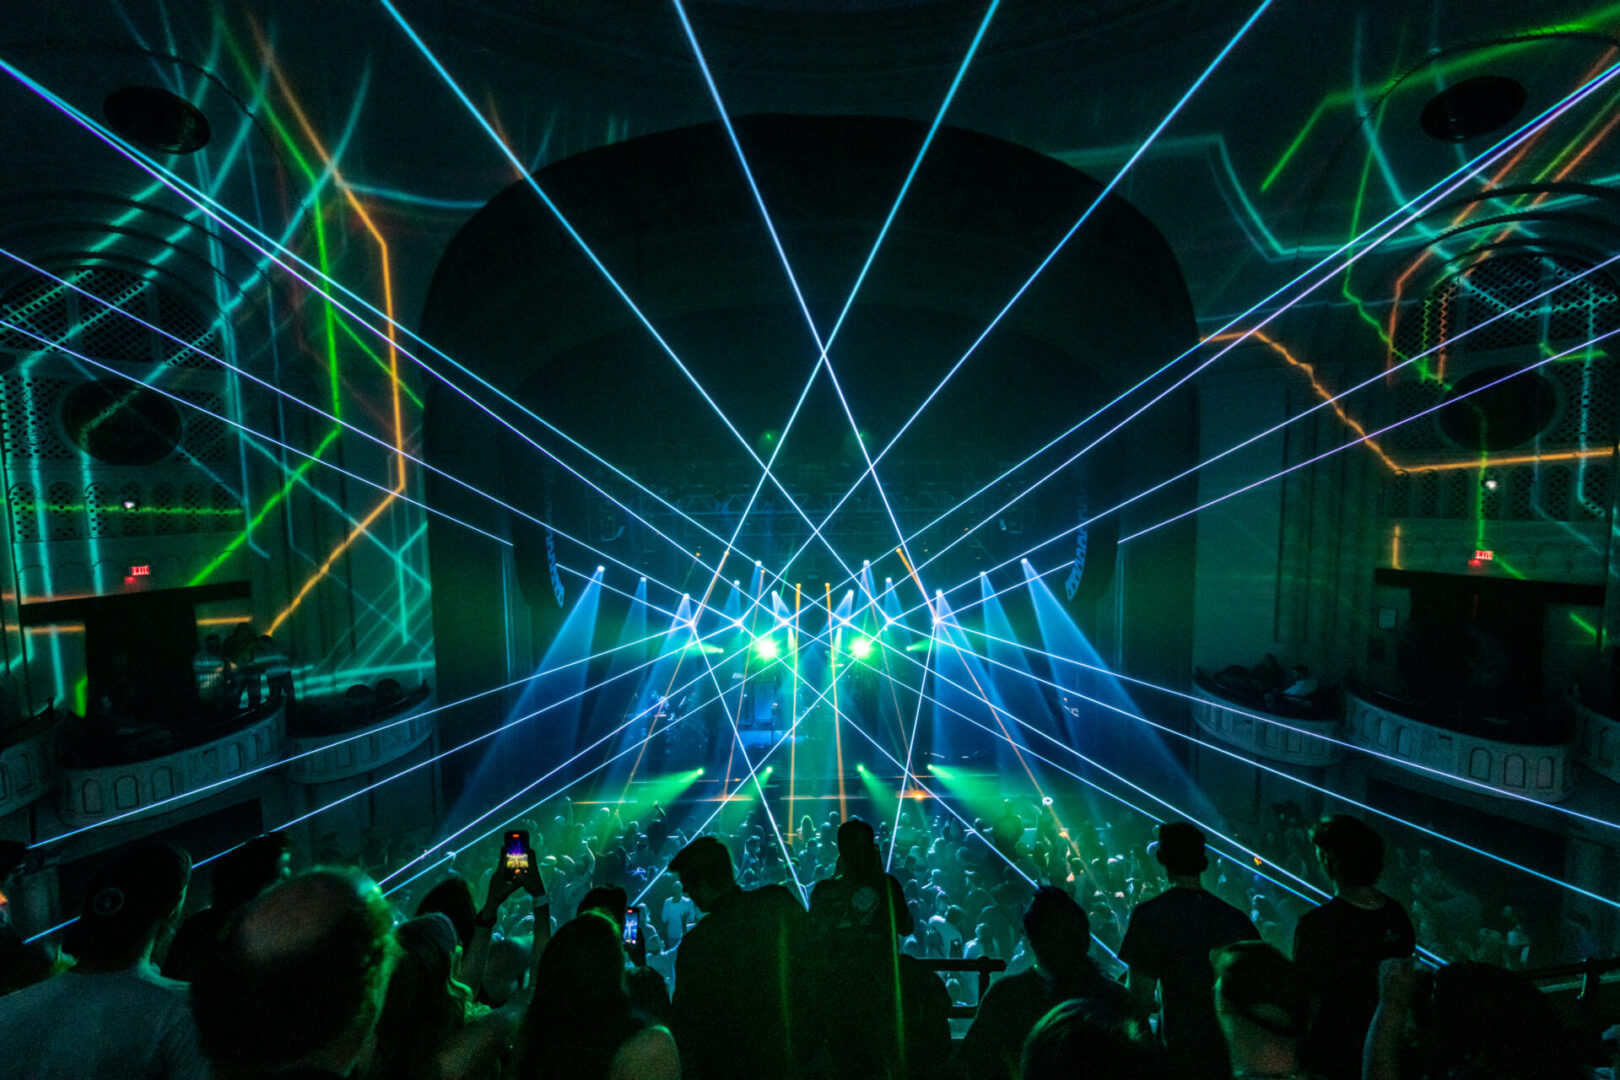 A crowd of people watching a laser light show.